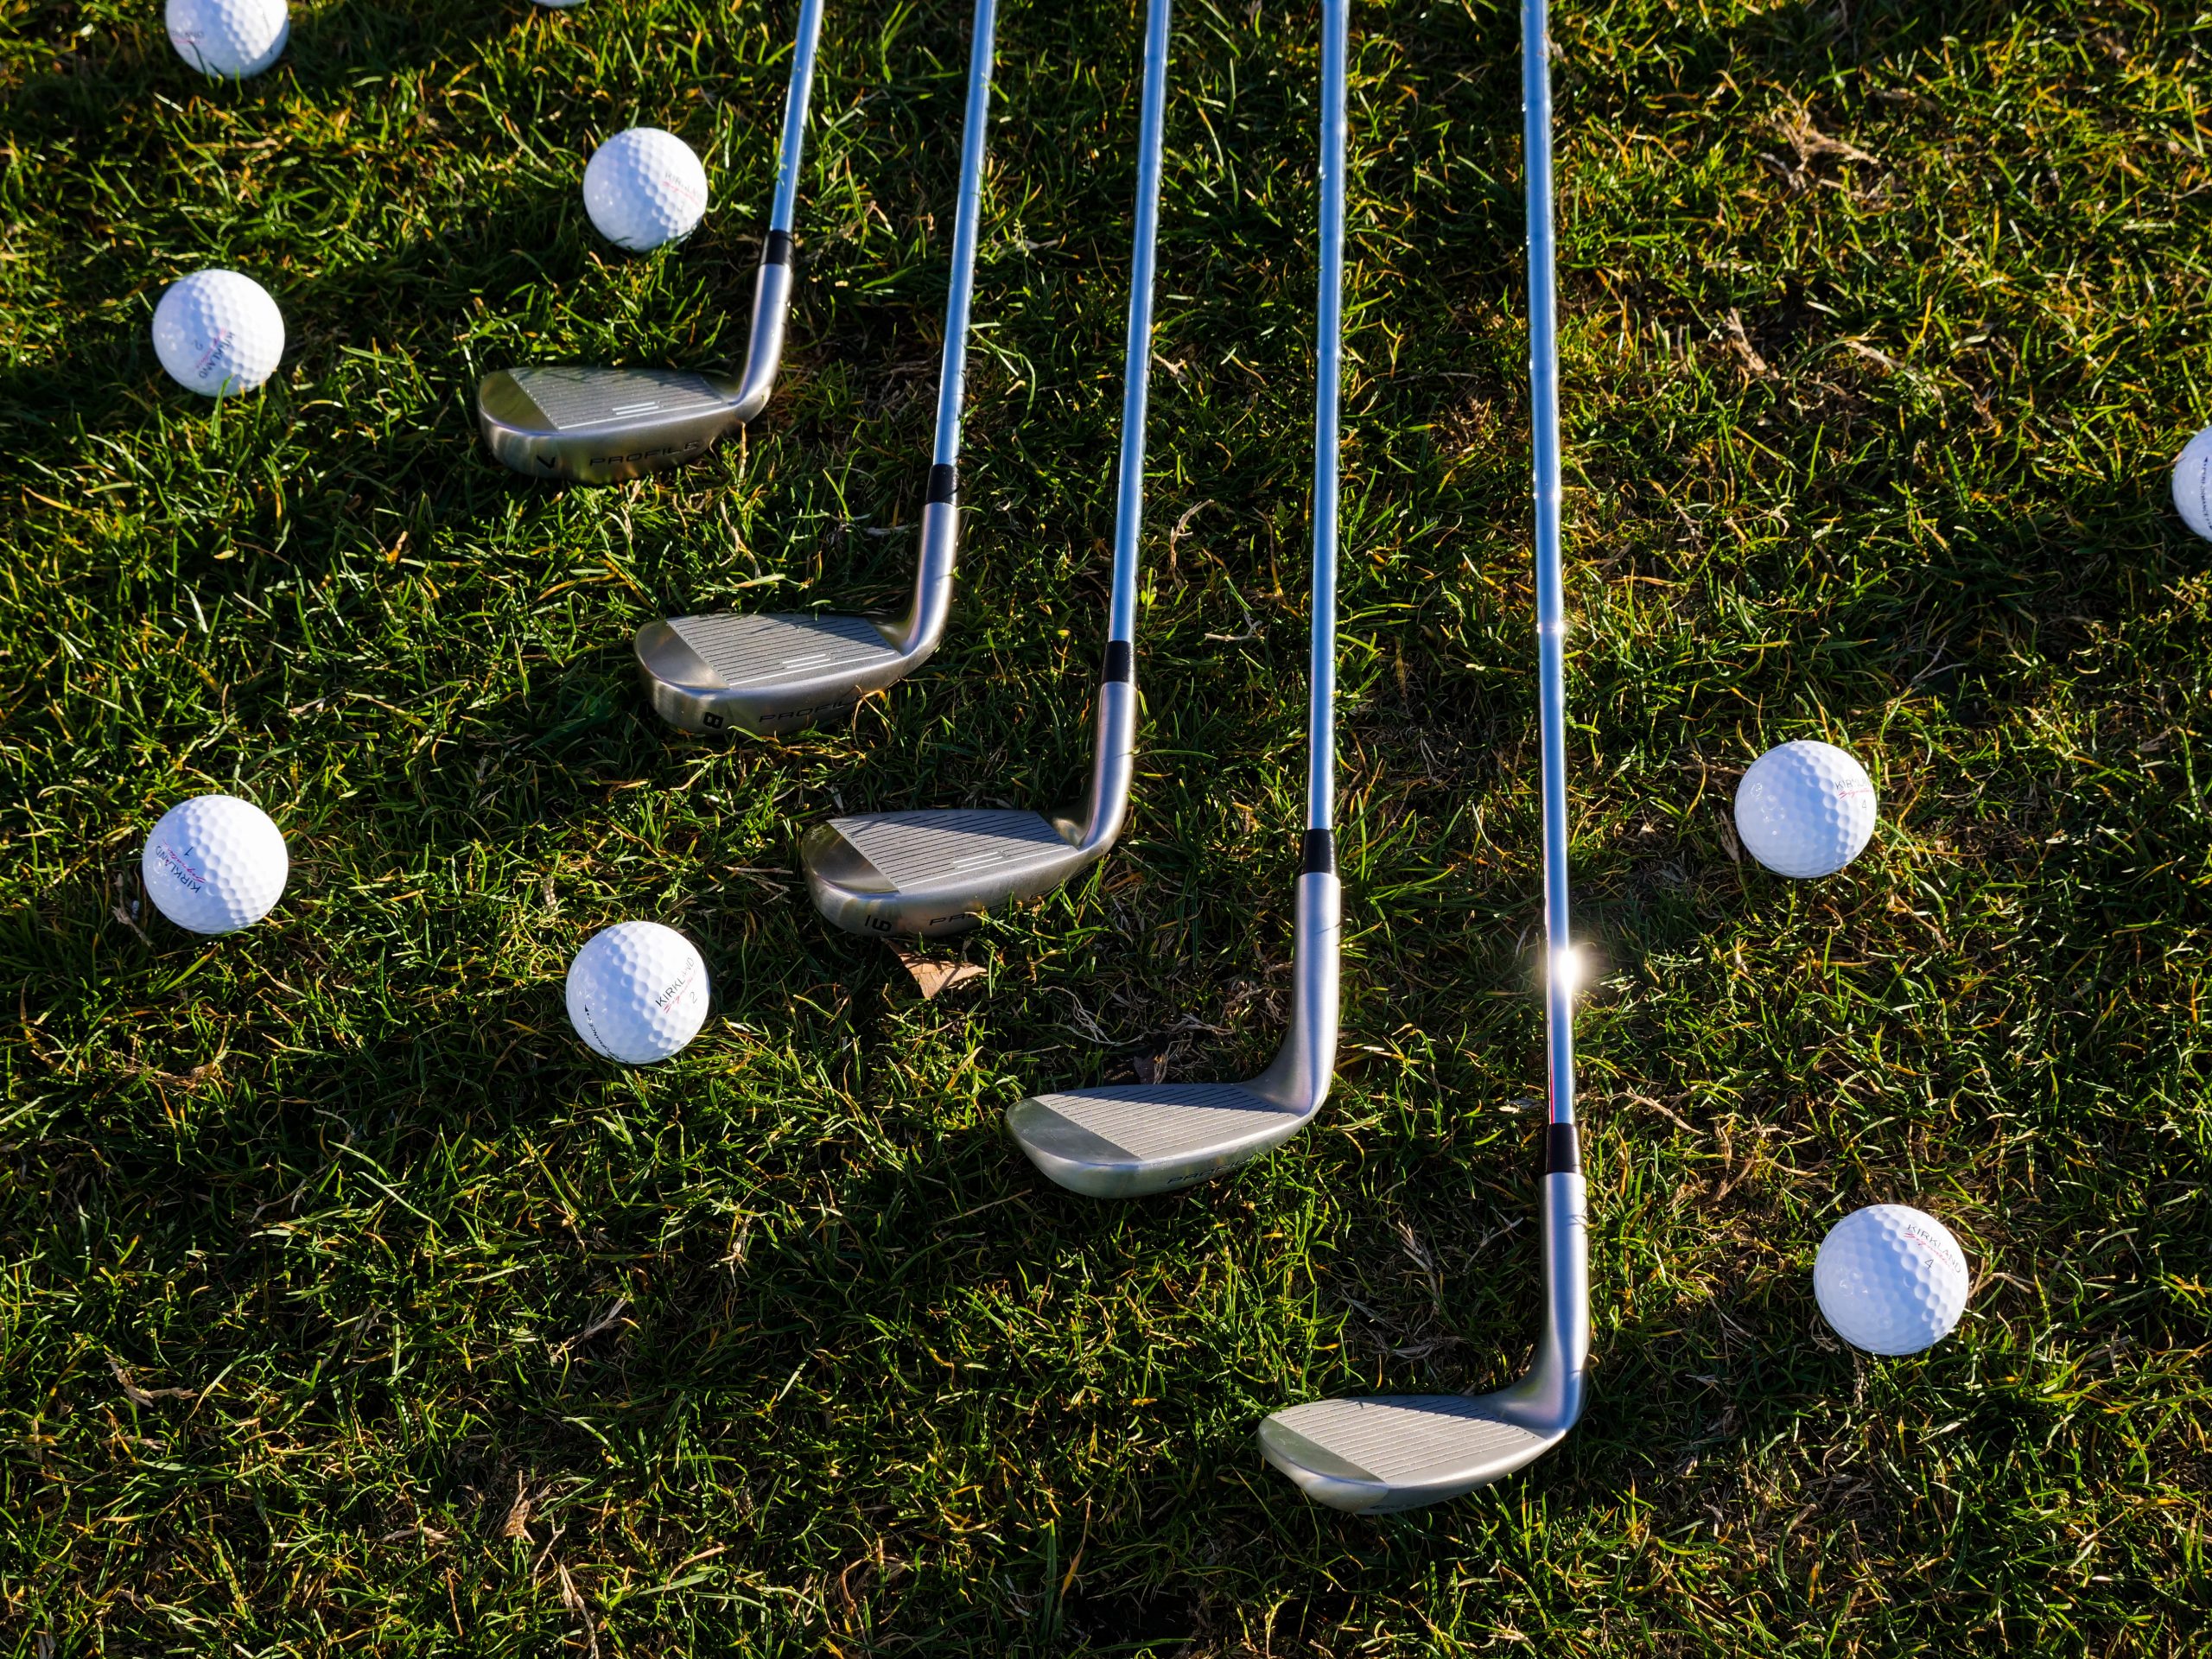 types of golf wedges